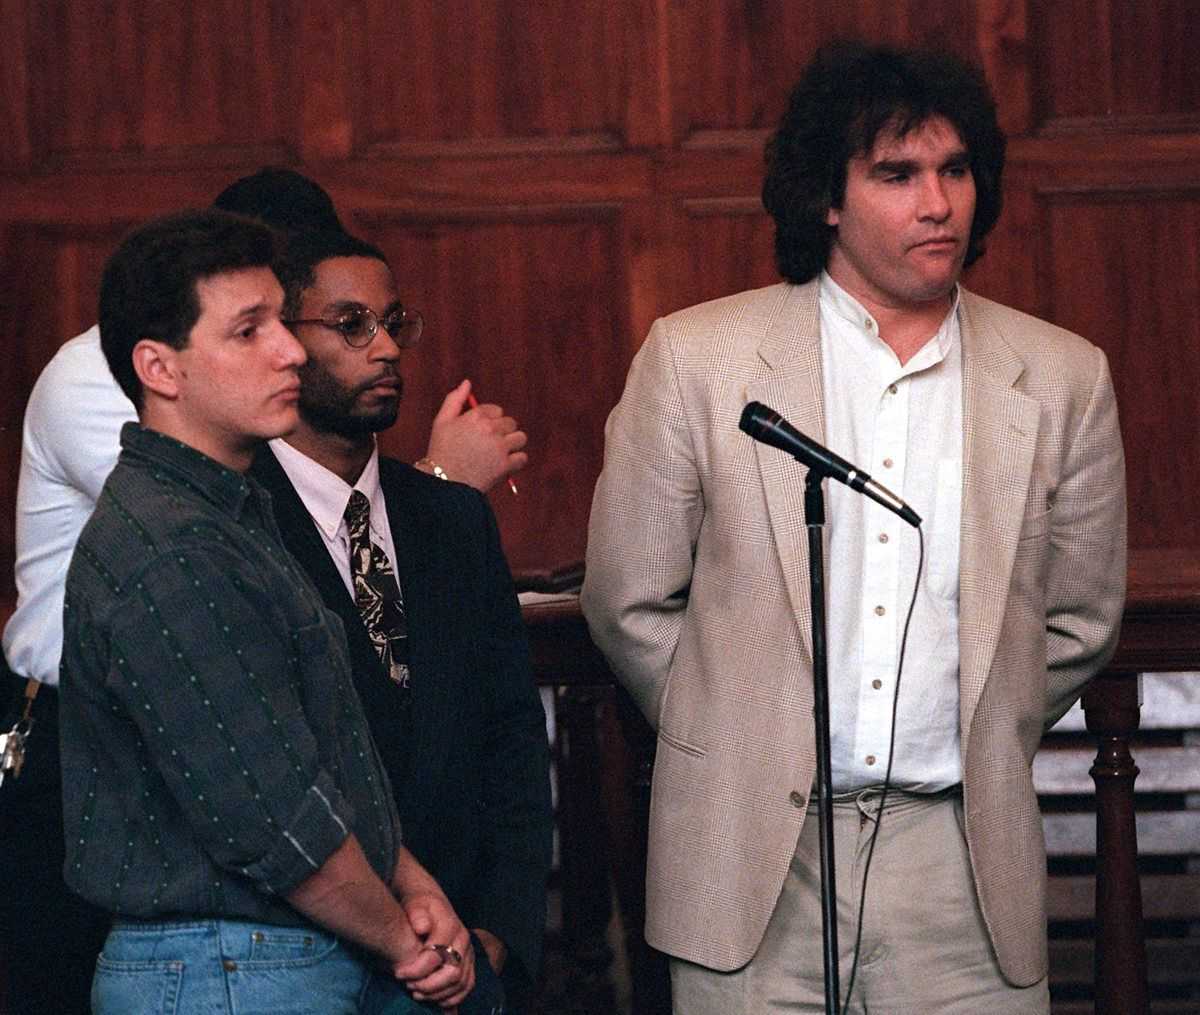 Matthew Stuart (right) was arraigned on drug charges in Chelsea District Court on May 16, 1997.